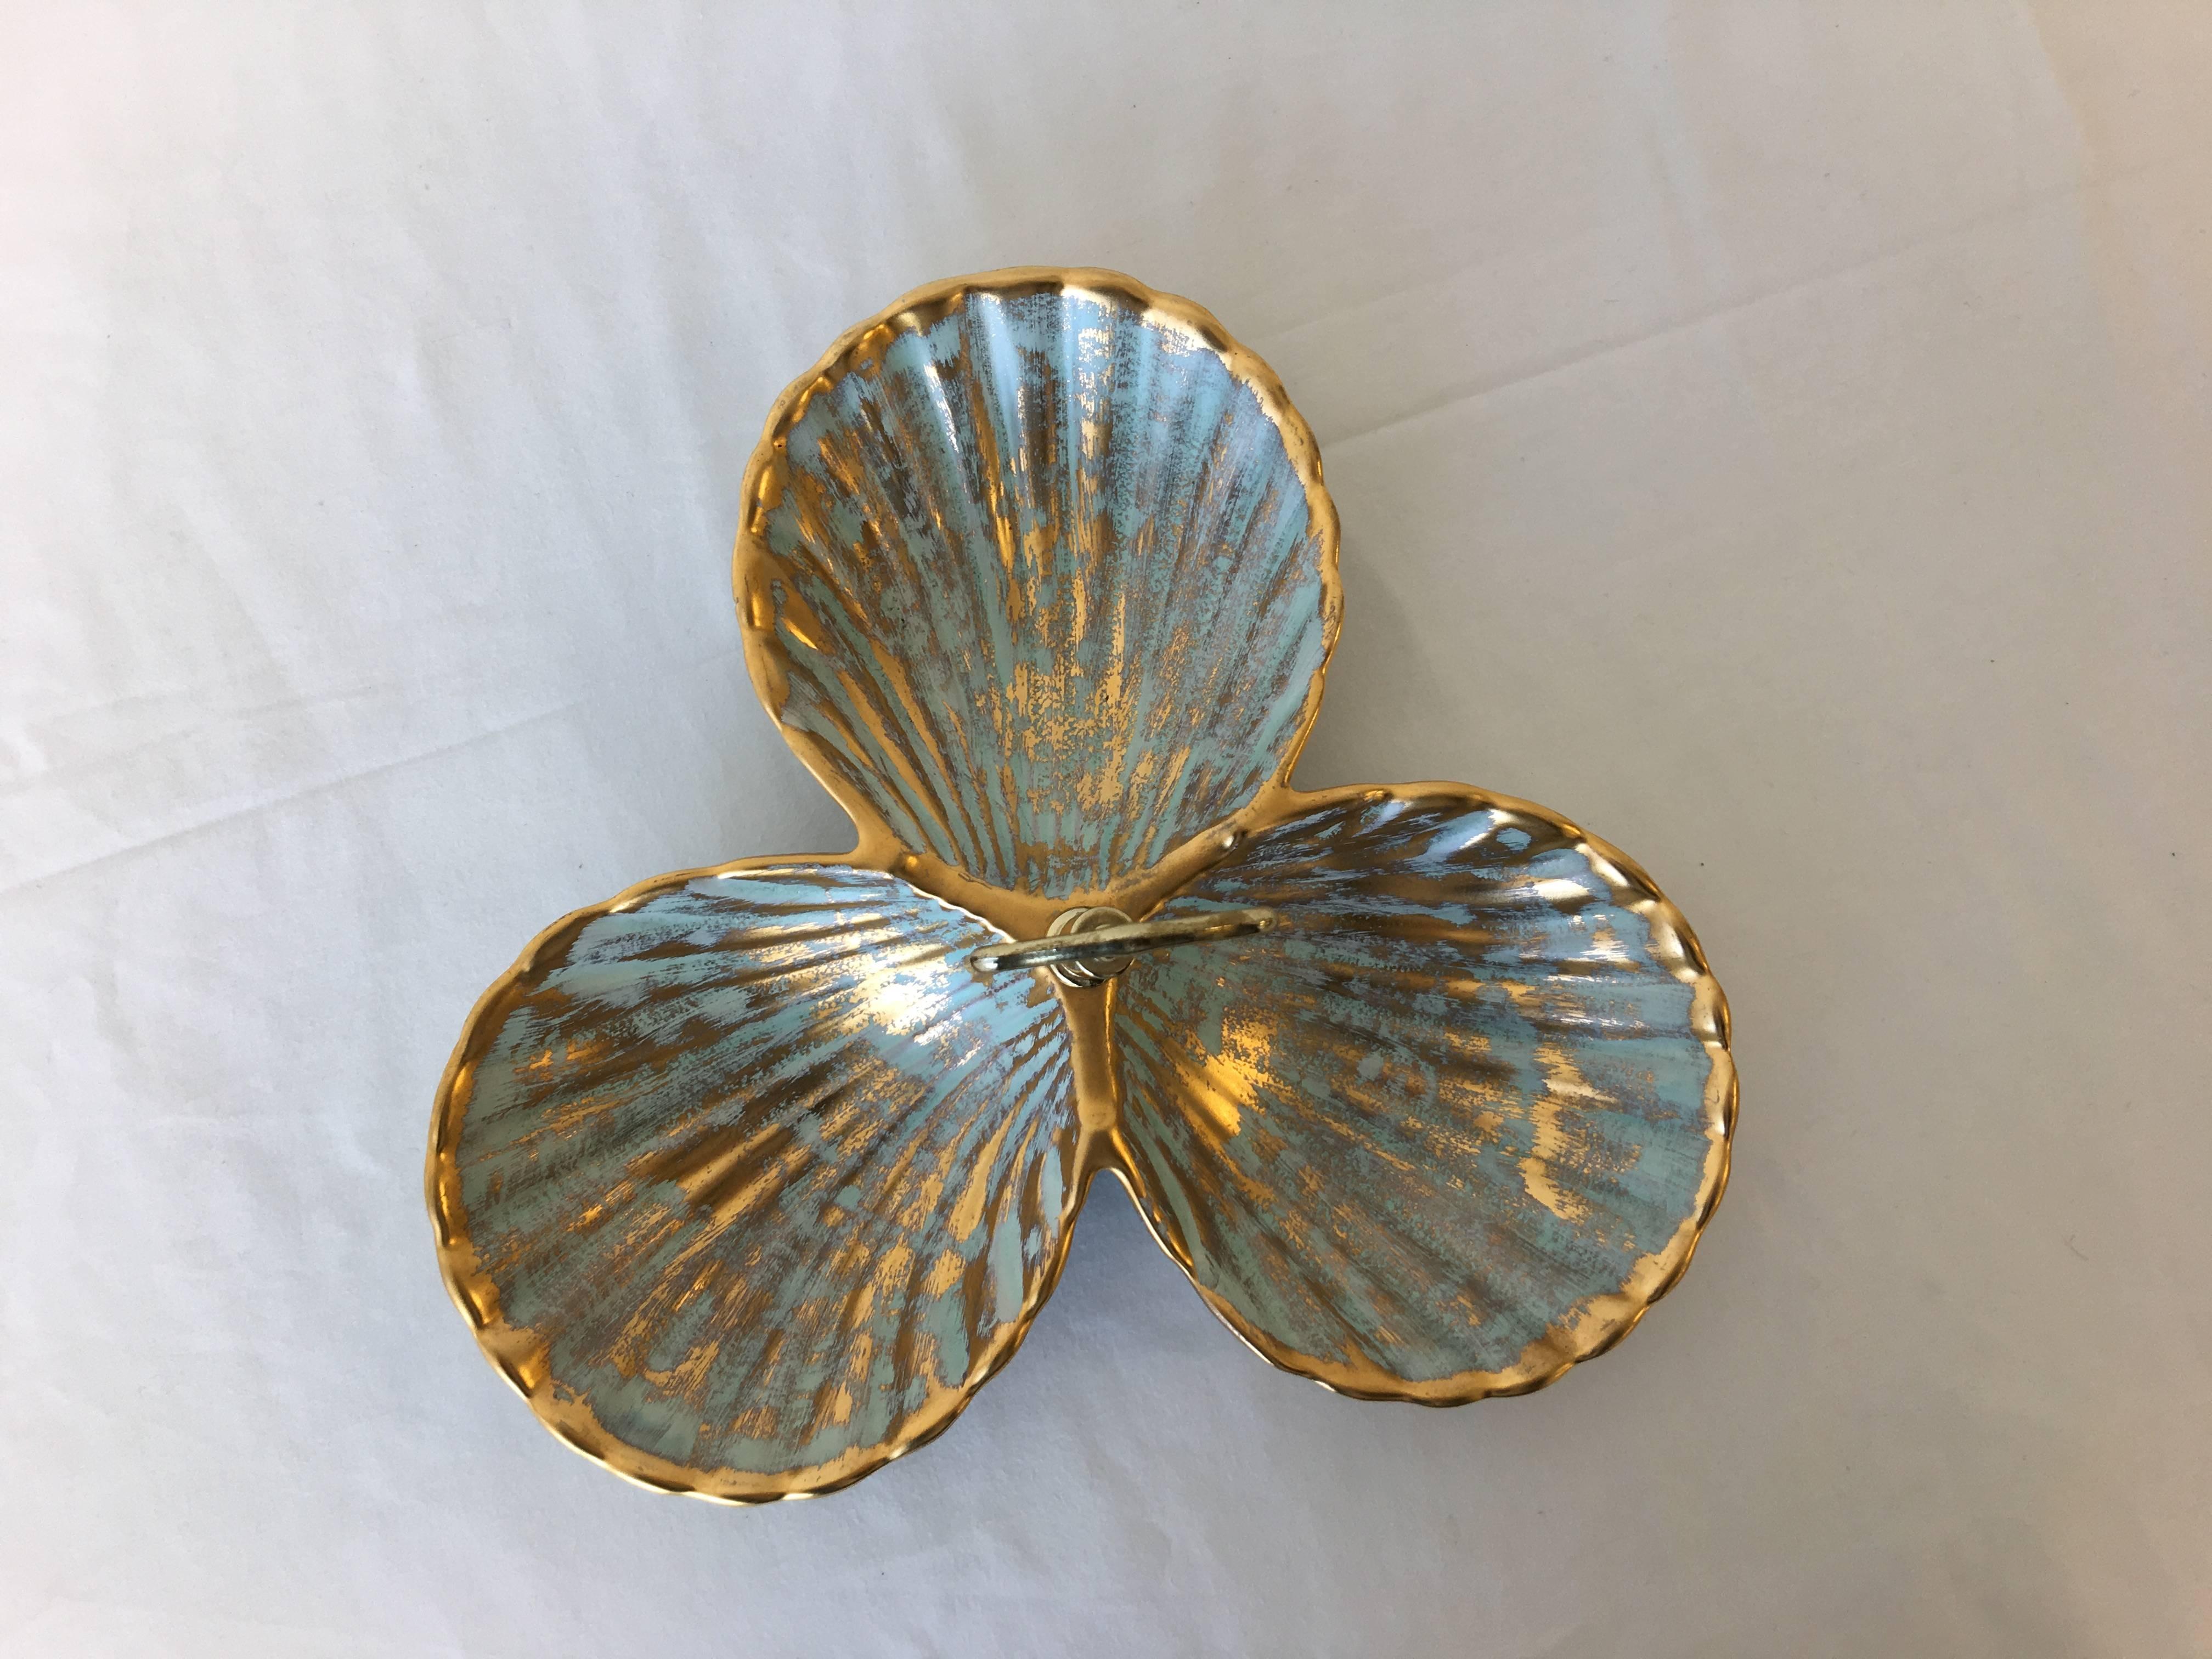 Offered is a lovely, 1970s gold and turquoise Stangl Pottery serving dish shaped as a seashell. Three separate dishes with a polished brass handle. Each dish is 6